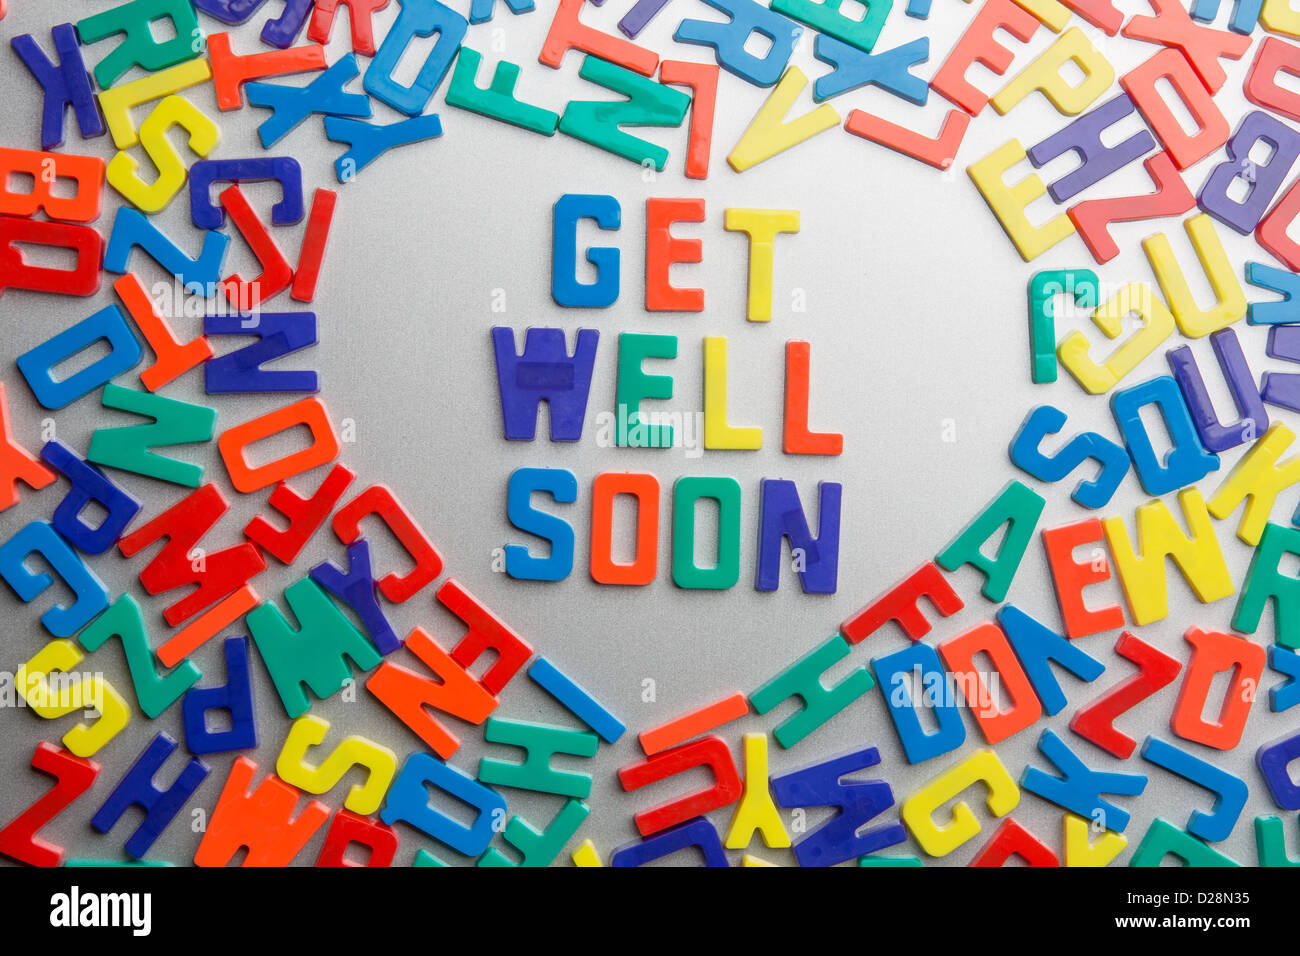 "Get Well Soon" - Refrigerator magnets spell a message out of a jumble of letters Stock Photo